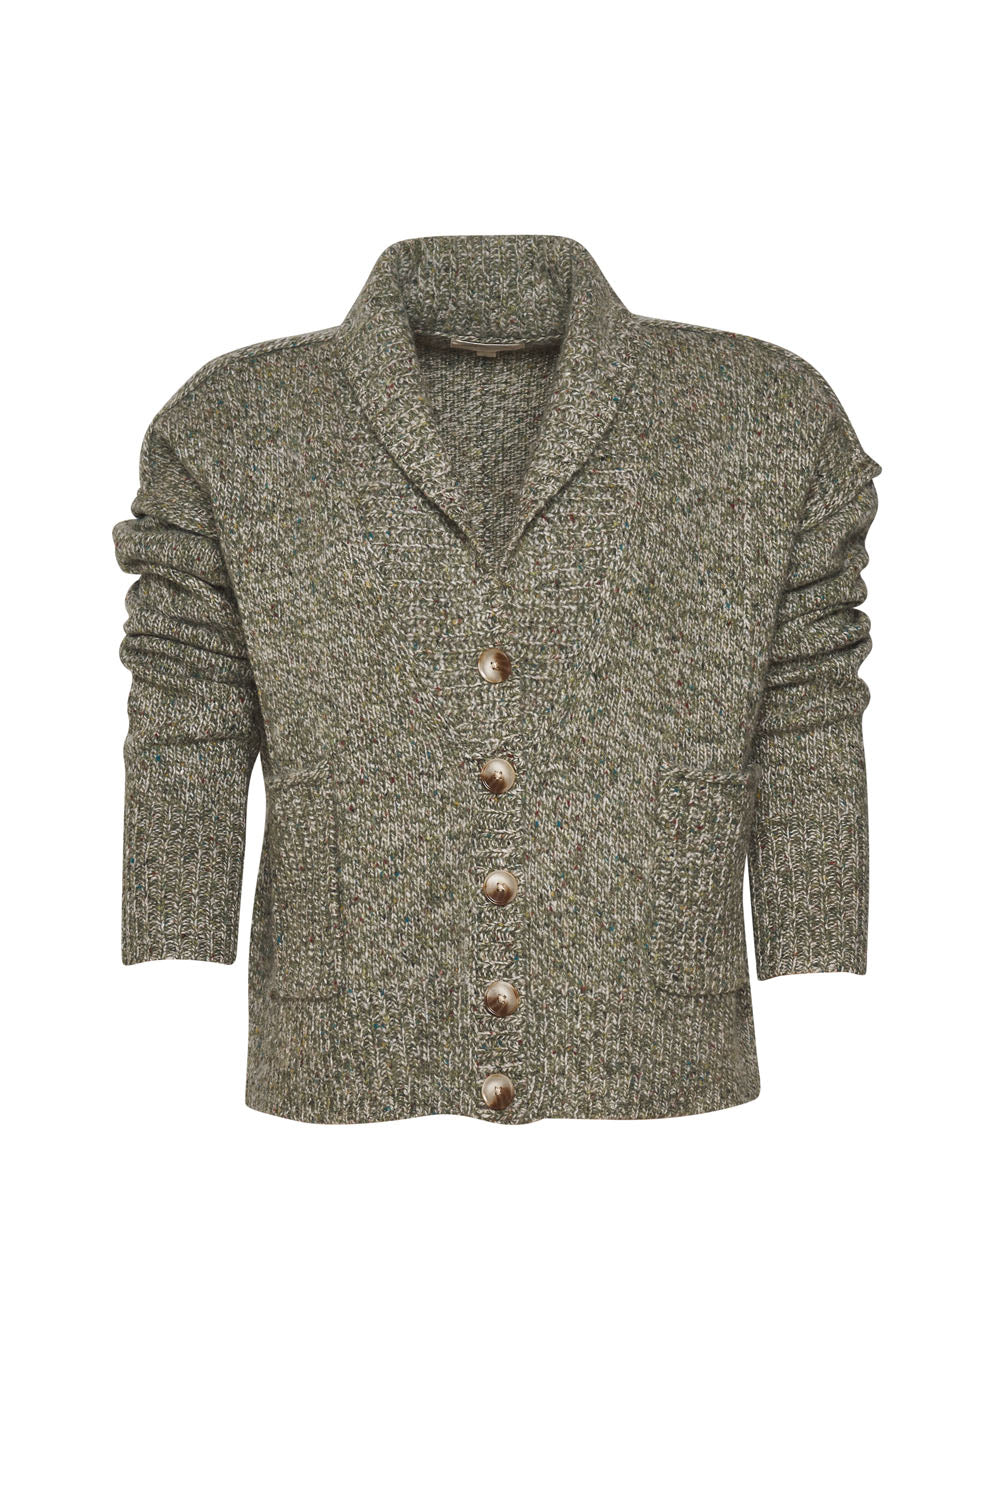 MADLY SWEETLY MISS MOSSY CARDI - OLIVE MULTI - THE VOGUE STORE